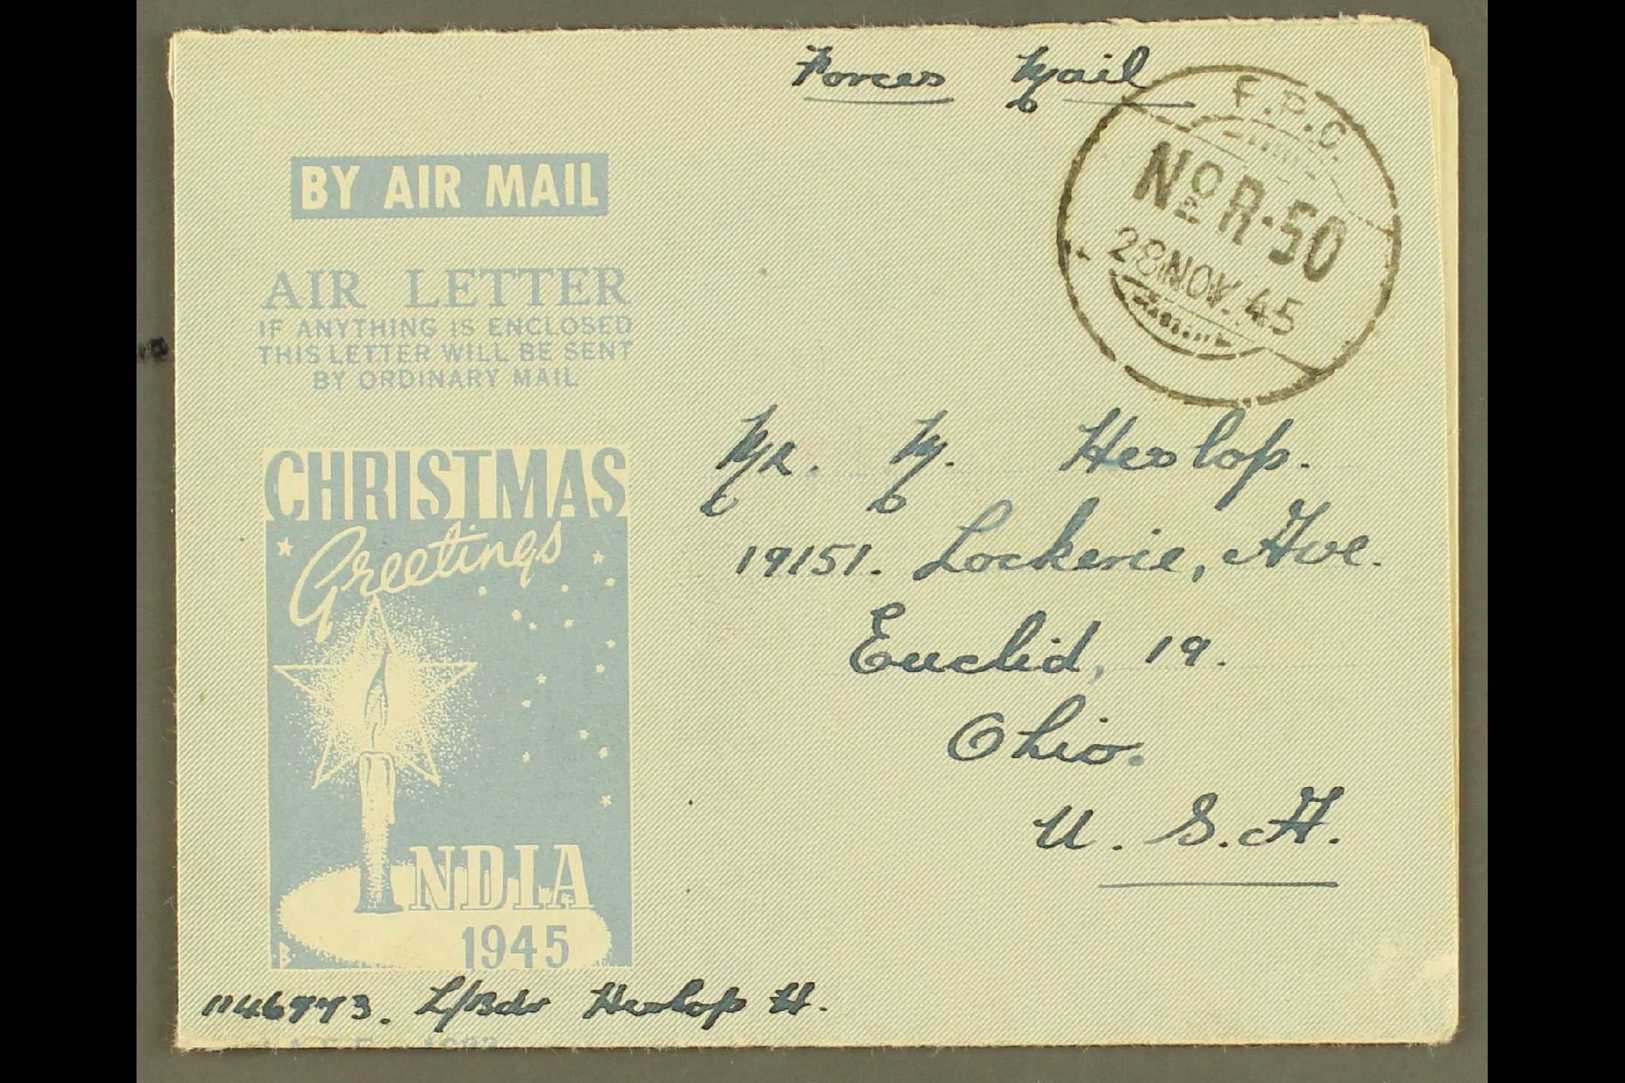 6551 1945 BRITISH MILITARY FORCES CHRISTMAS AEROGRAMME (Kessler 194) Cancelled F.P.O. R-50 Cds, Sent To England, Attract - Other & Unclassified